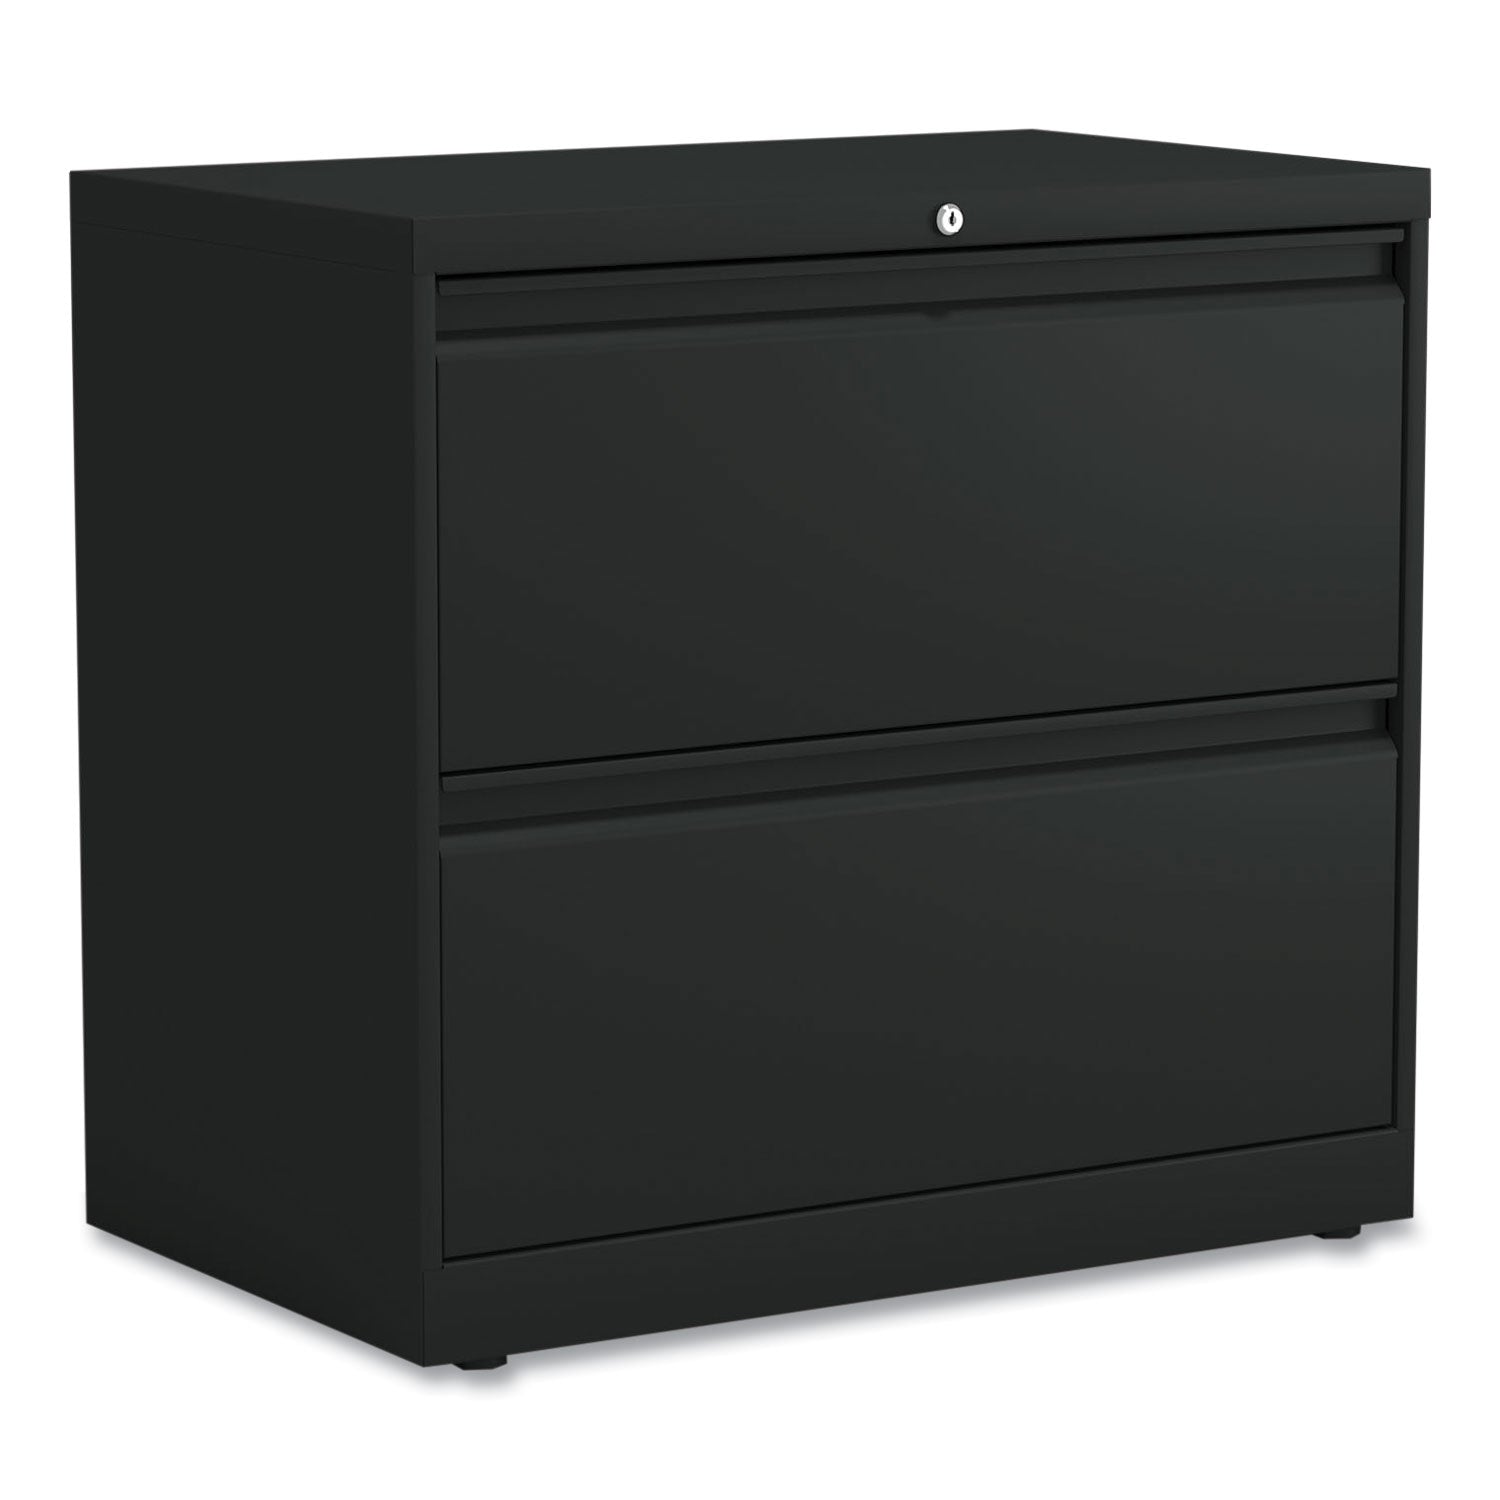 lateral-file-2-legal-letter-size-file-drawers-black-30-x-1863-x-28_alehlf3029bl - 1